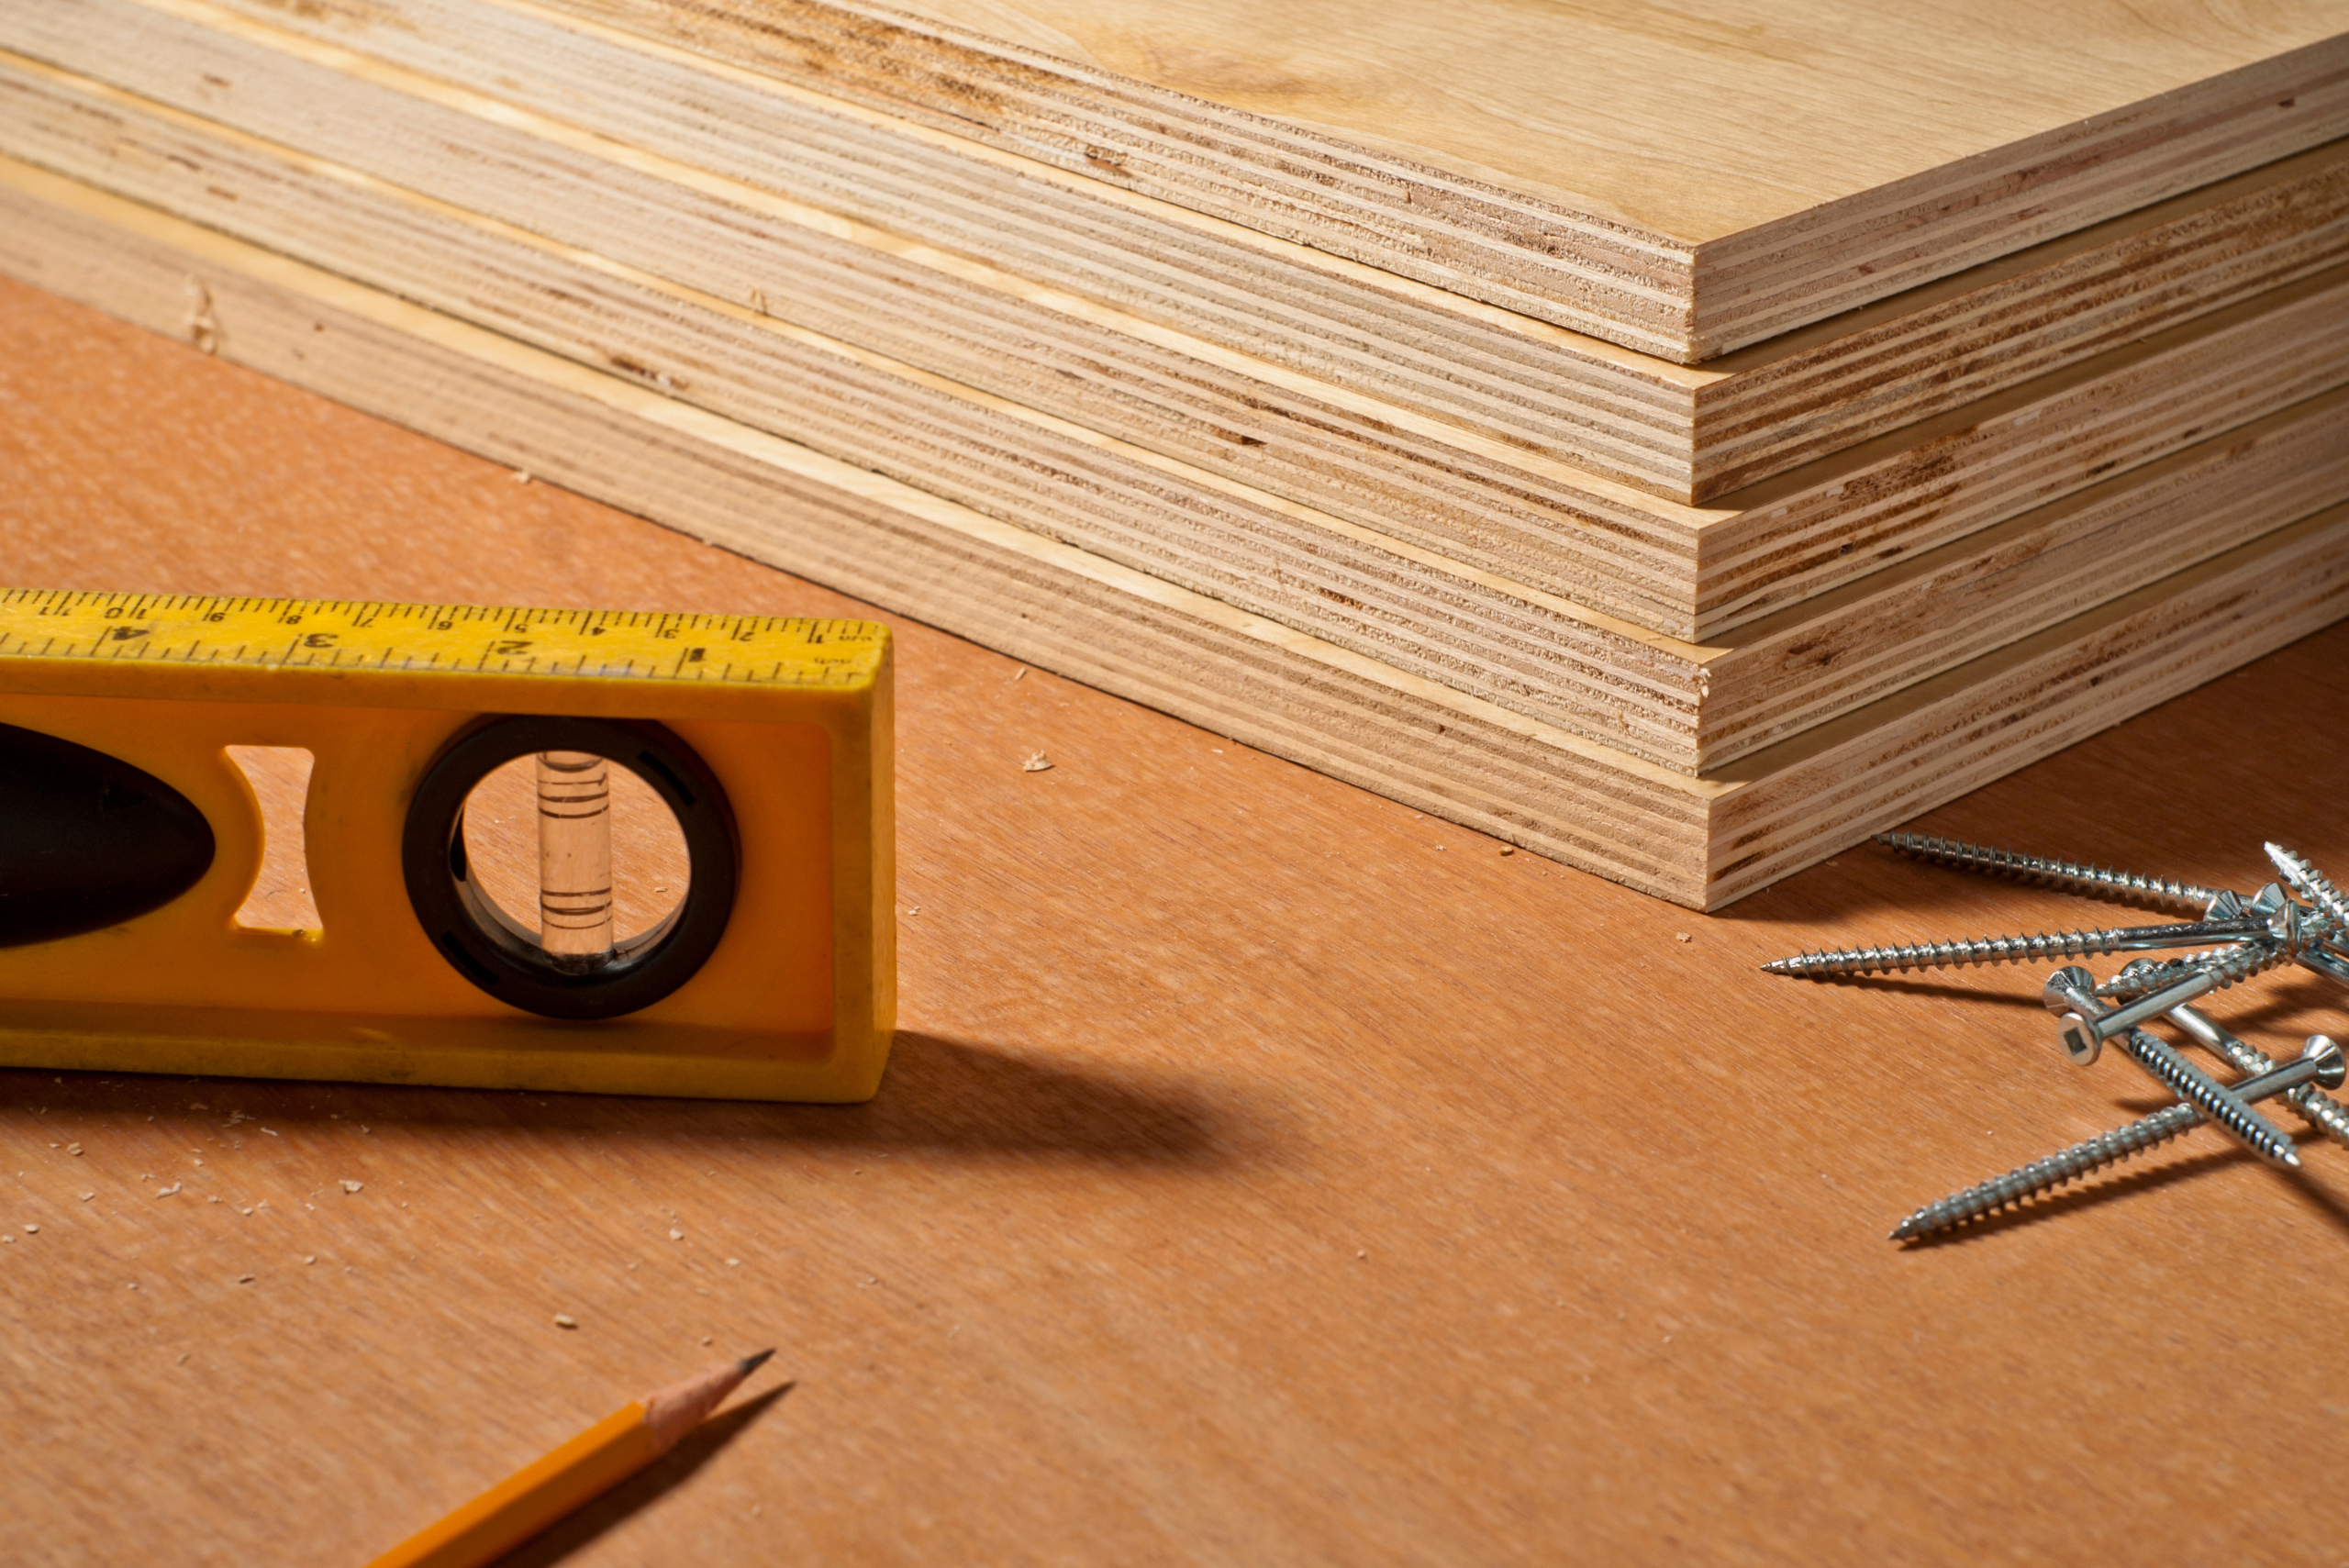 A stack of plywood beside a ruler with a built-in level.